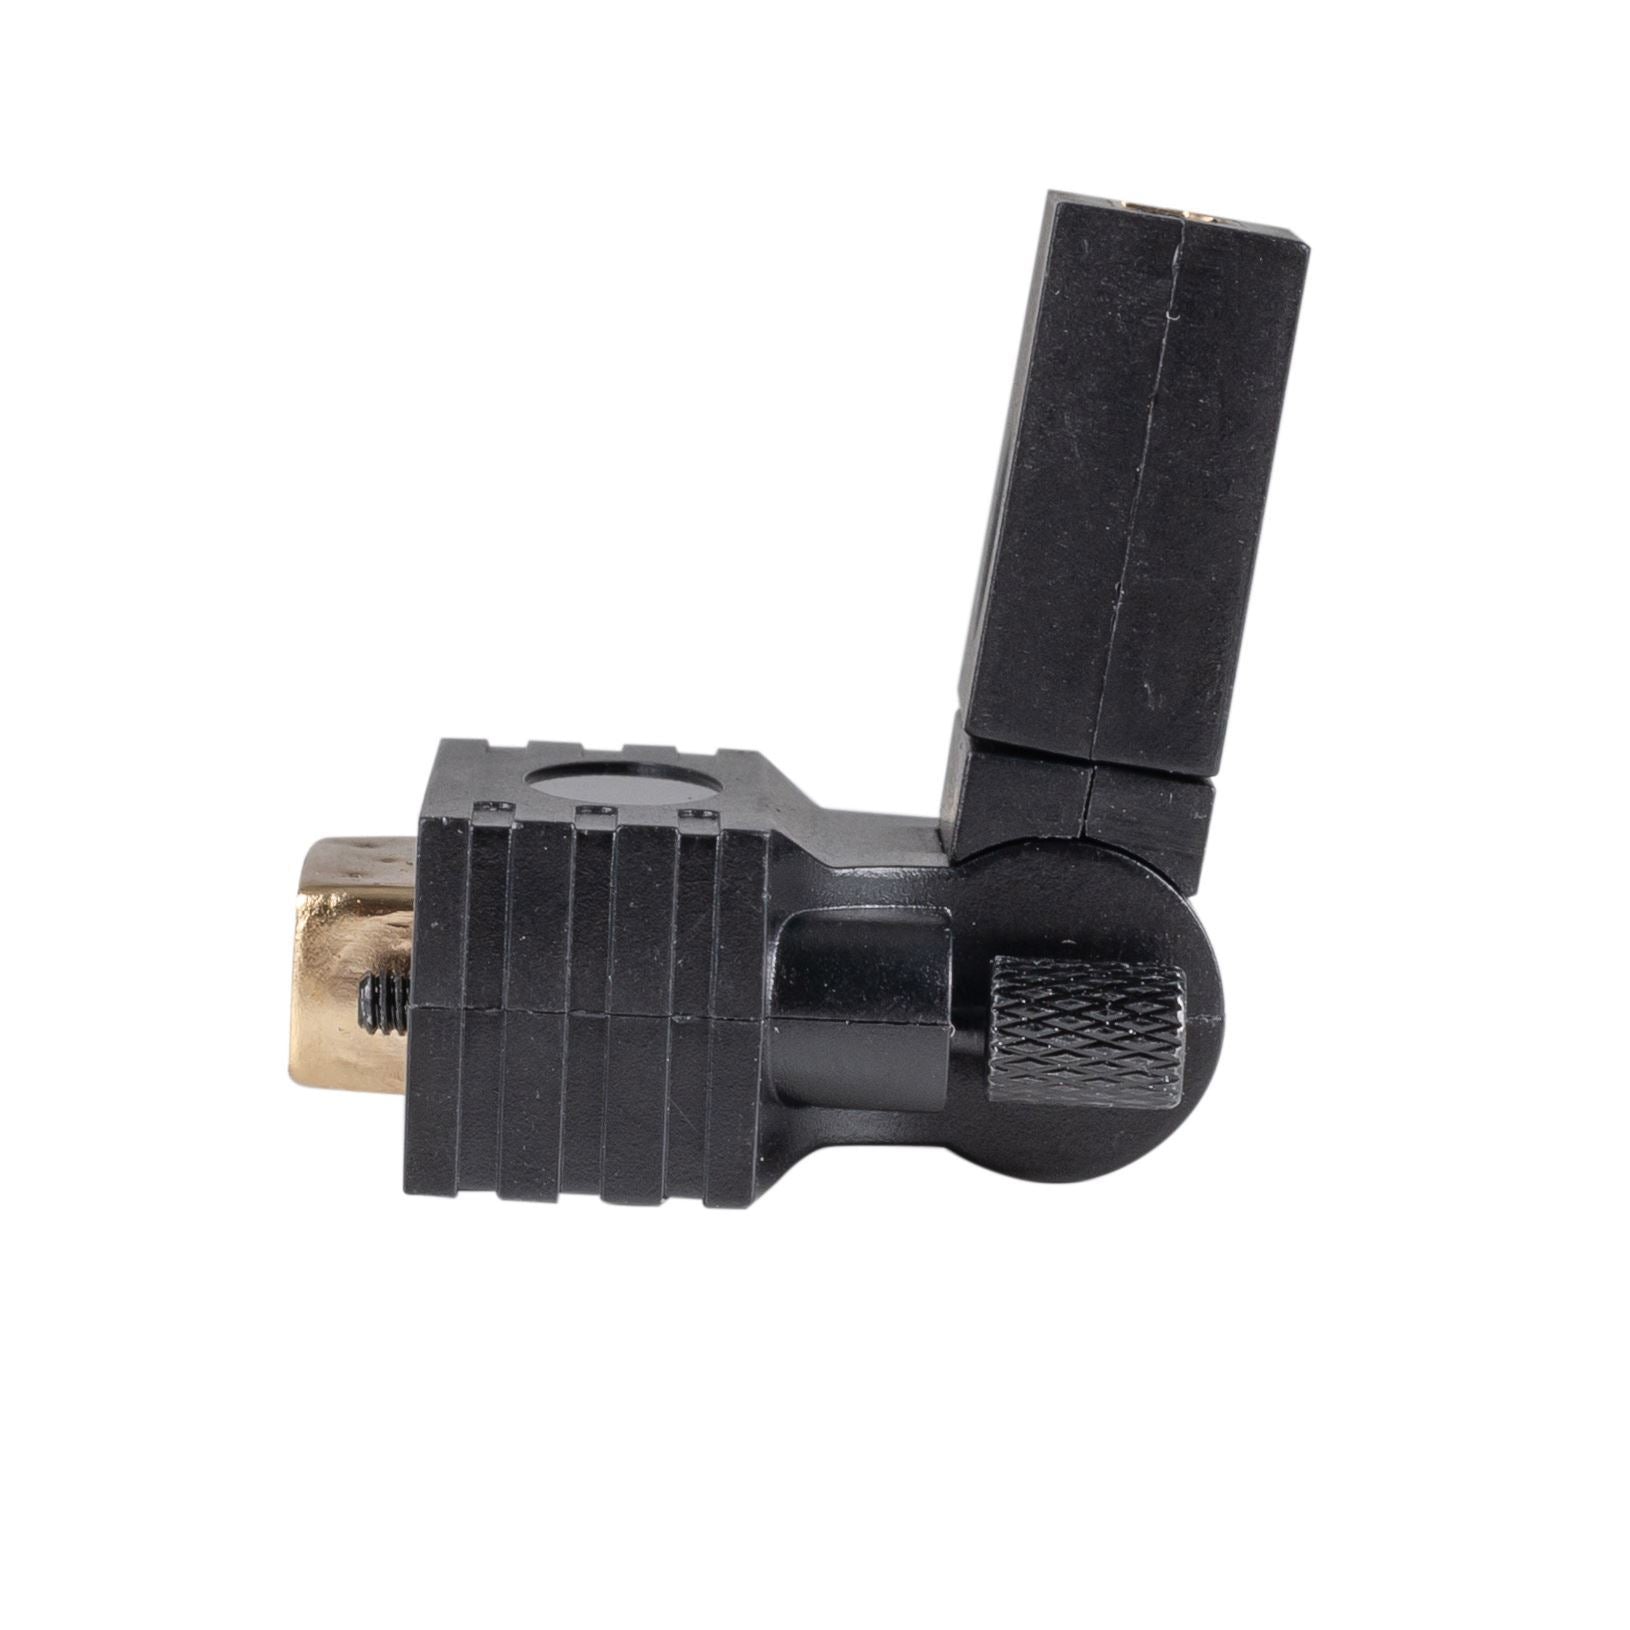 DYNAMIX_HDMI_Female_to_DVI-D_(24+1)_Male_Swivel_Adapter._Supports_up_to_2560x1440@60Hz 65